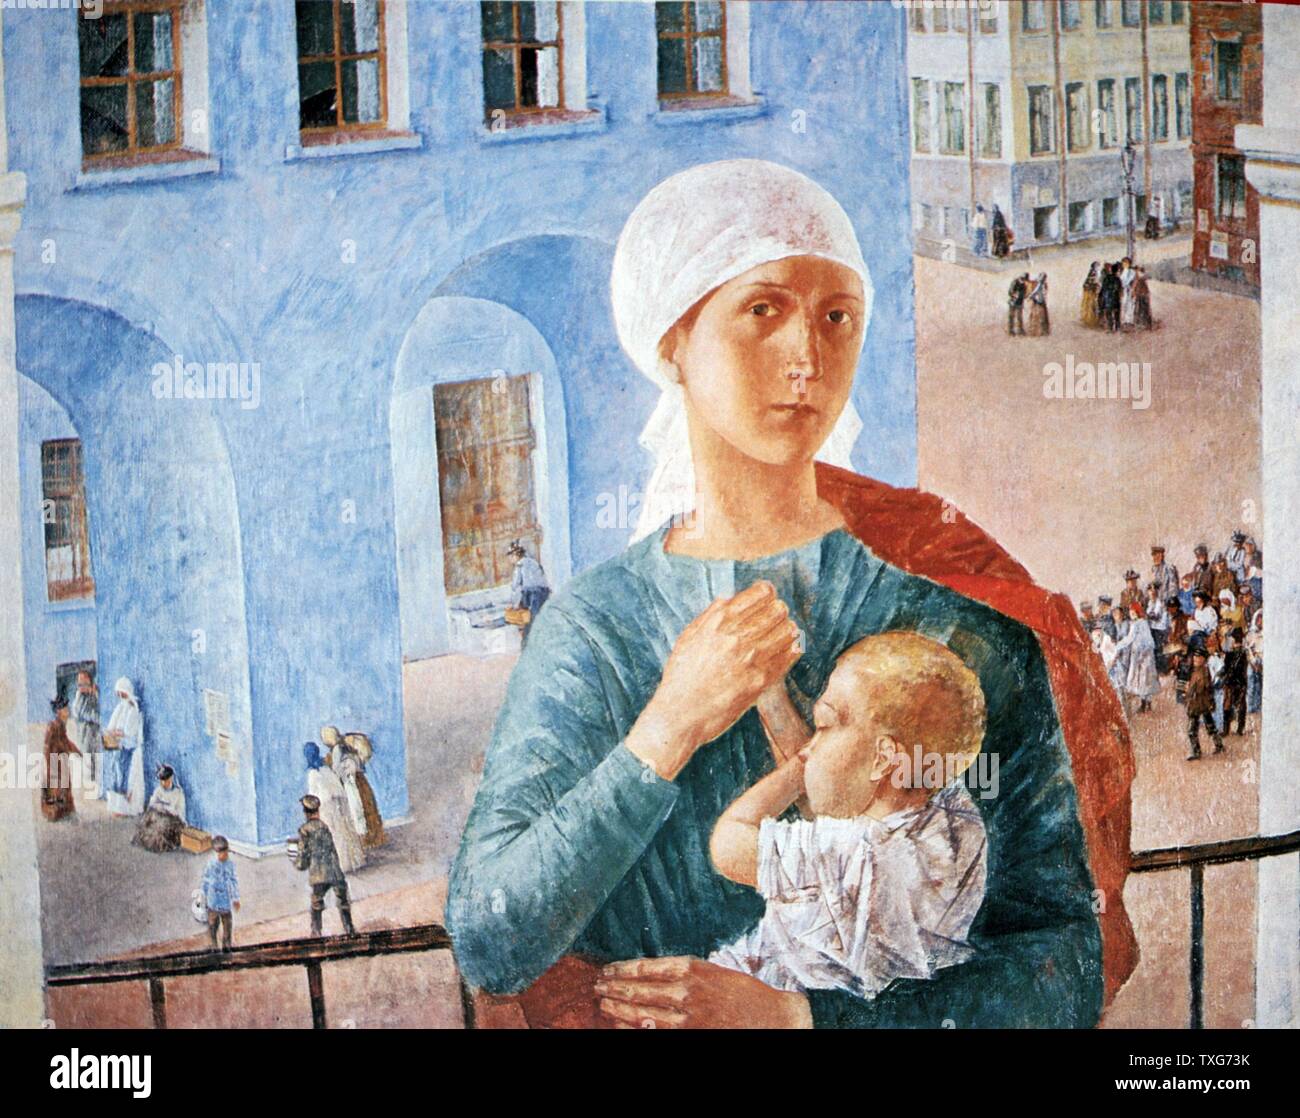 Kuzma Petrov-Vodkin Russian school 1918 in Petrograd - Young mother on balcony clasps her child. In the street below people go about their activities Oil on canvas Stock Photo